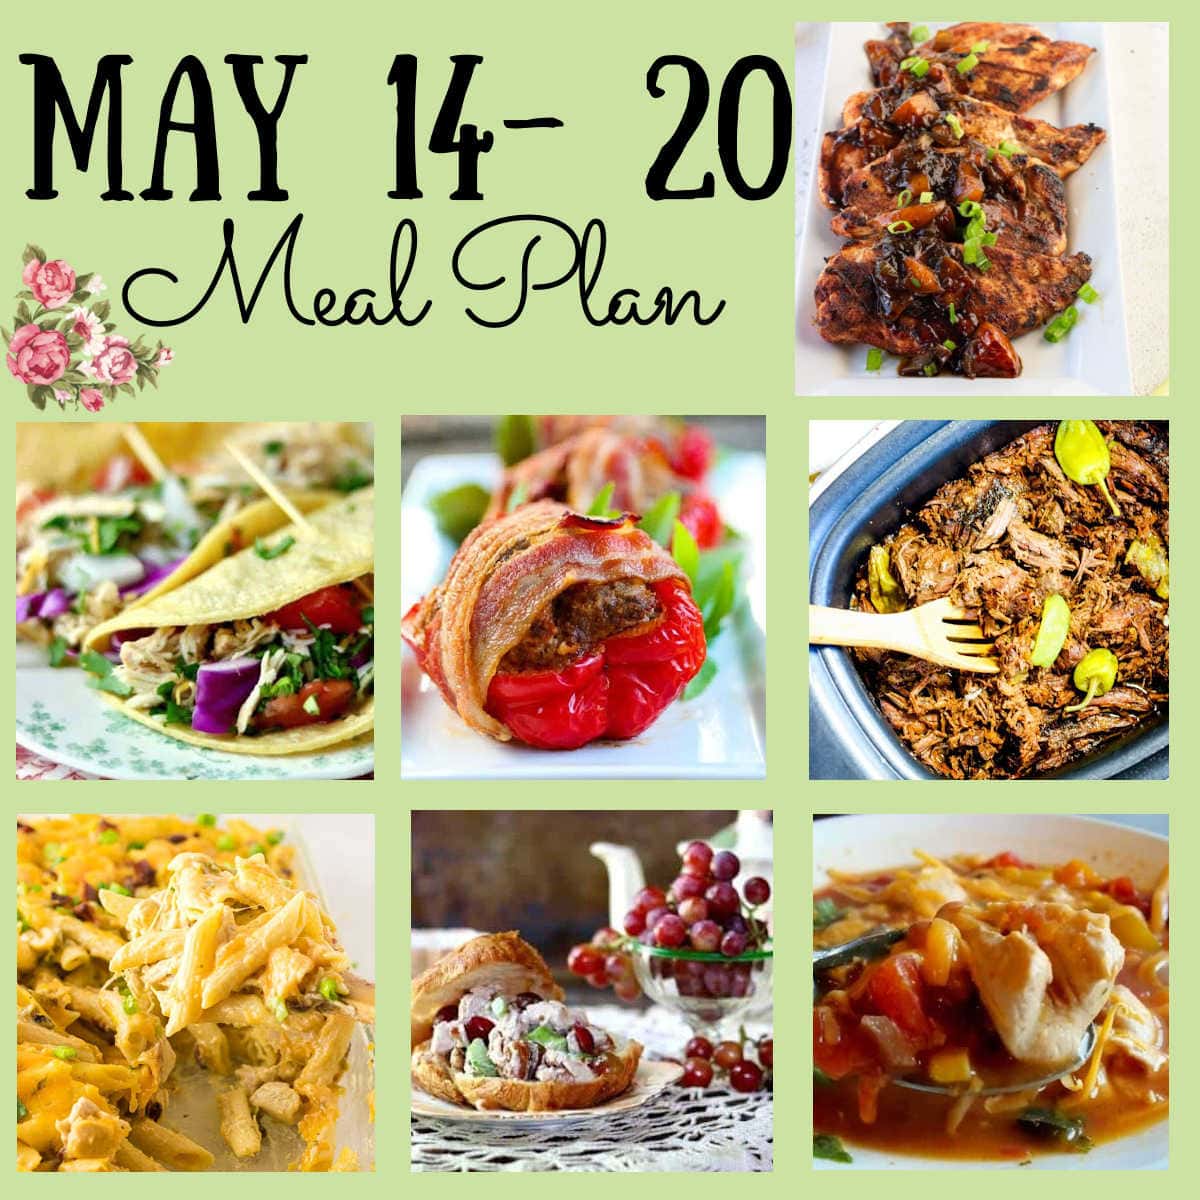 Collage of images from the May 14- 20 meal plan.